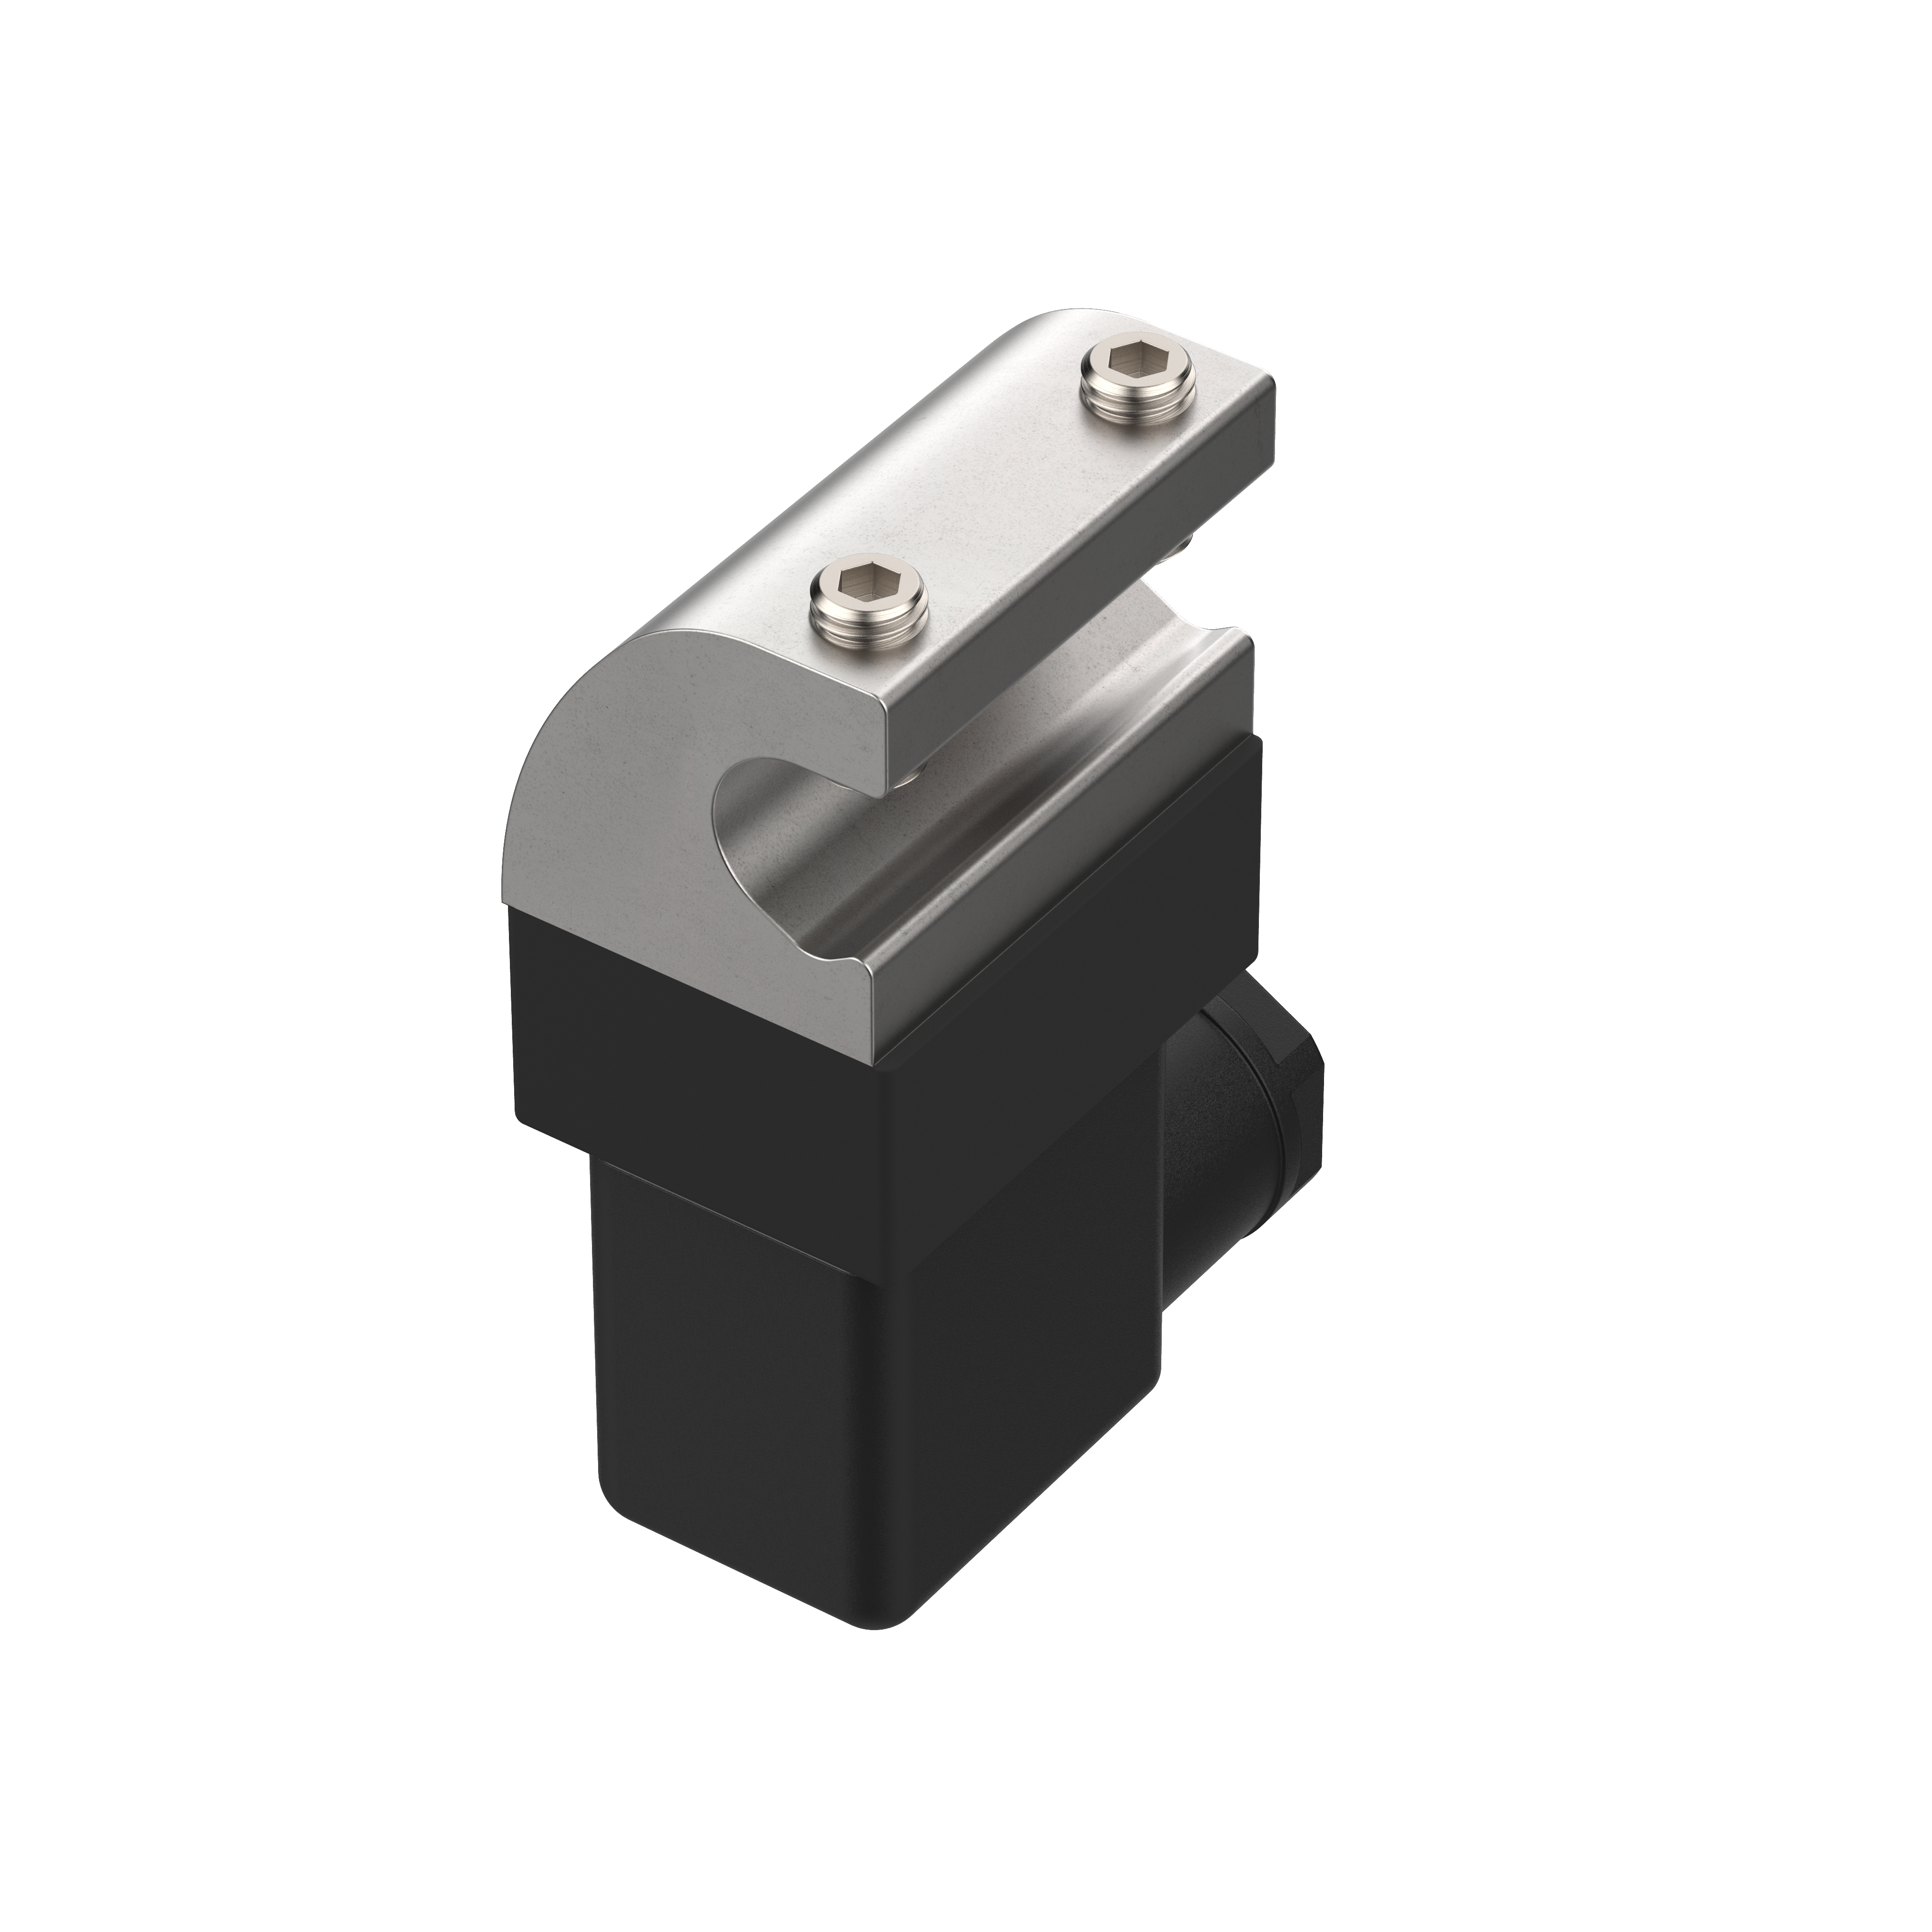 Proximity switches - magnetic sensor - 102240 - N.O., cable socket type MSD